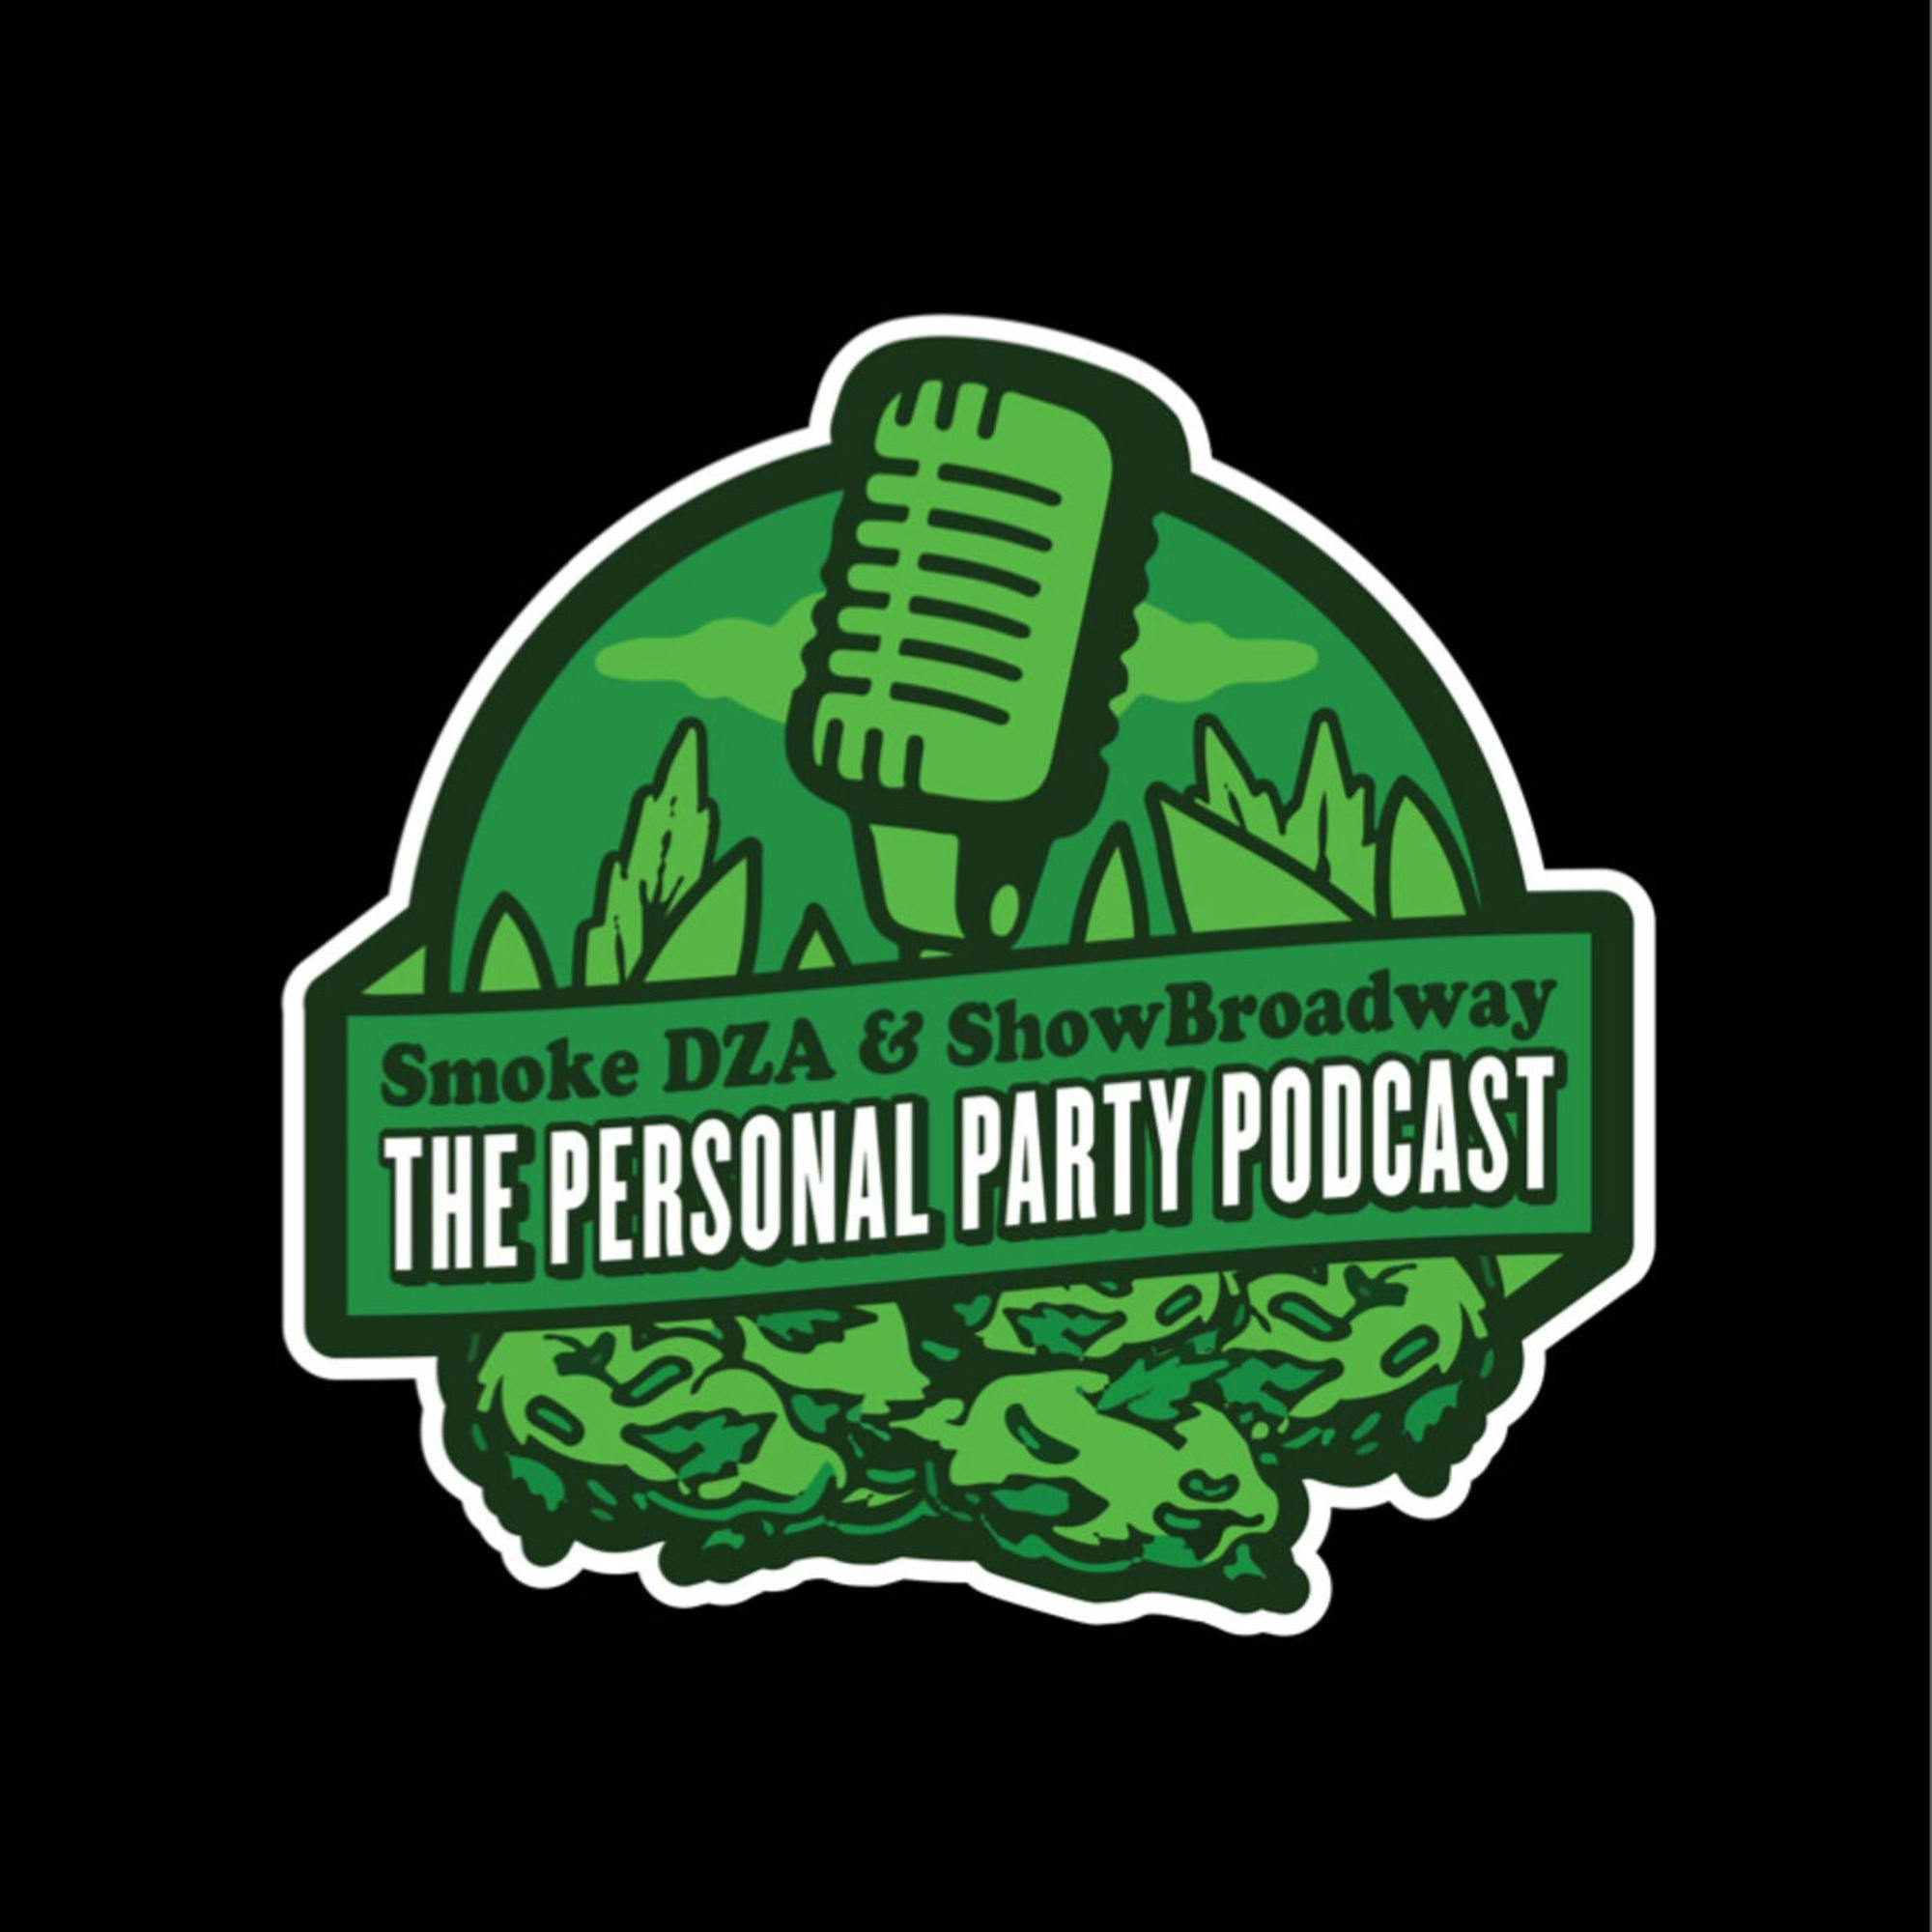 The Personal Party Podcast - “Don’t Touch My Weed!” Episode 001 Image